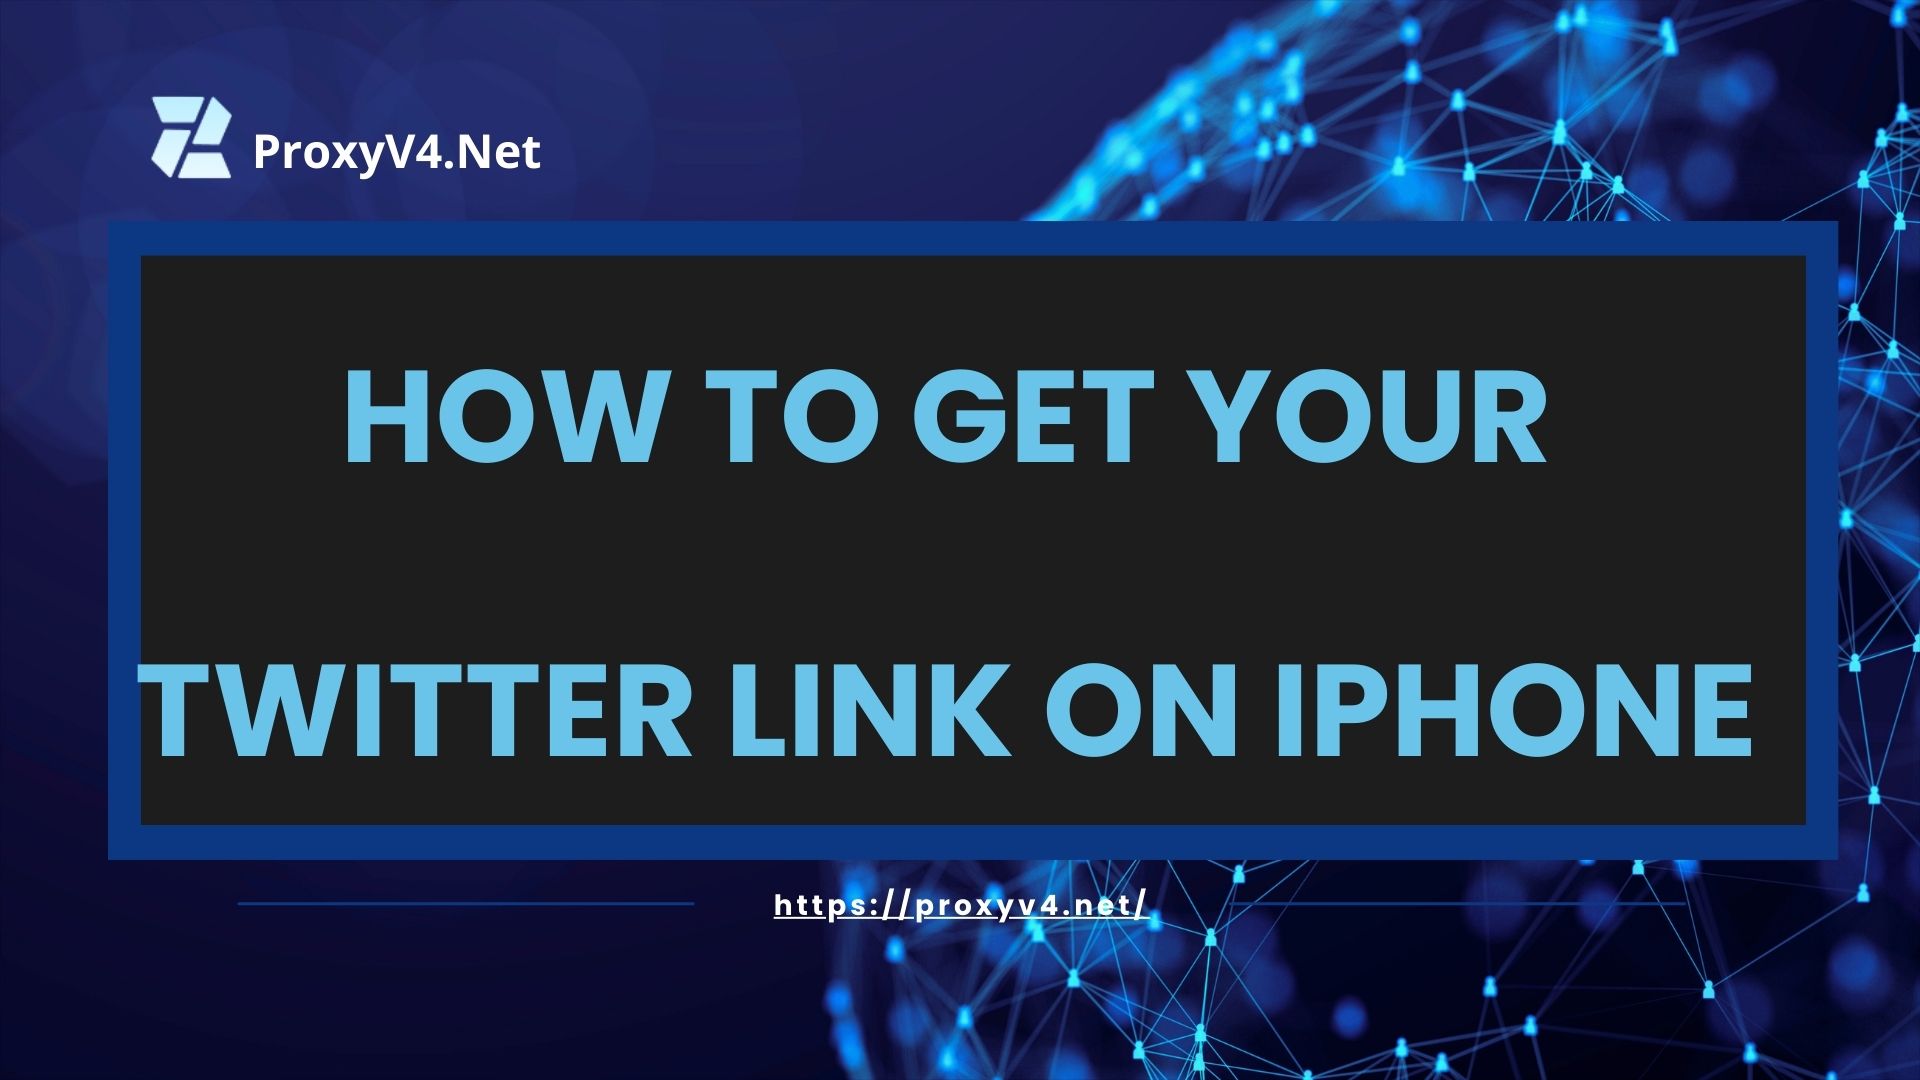 How to get your Twitter link on iPhone